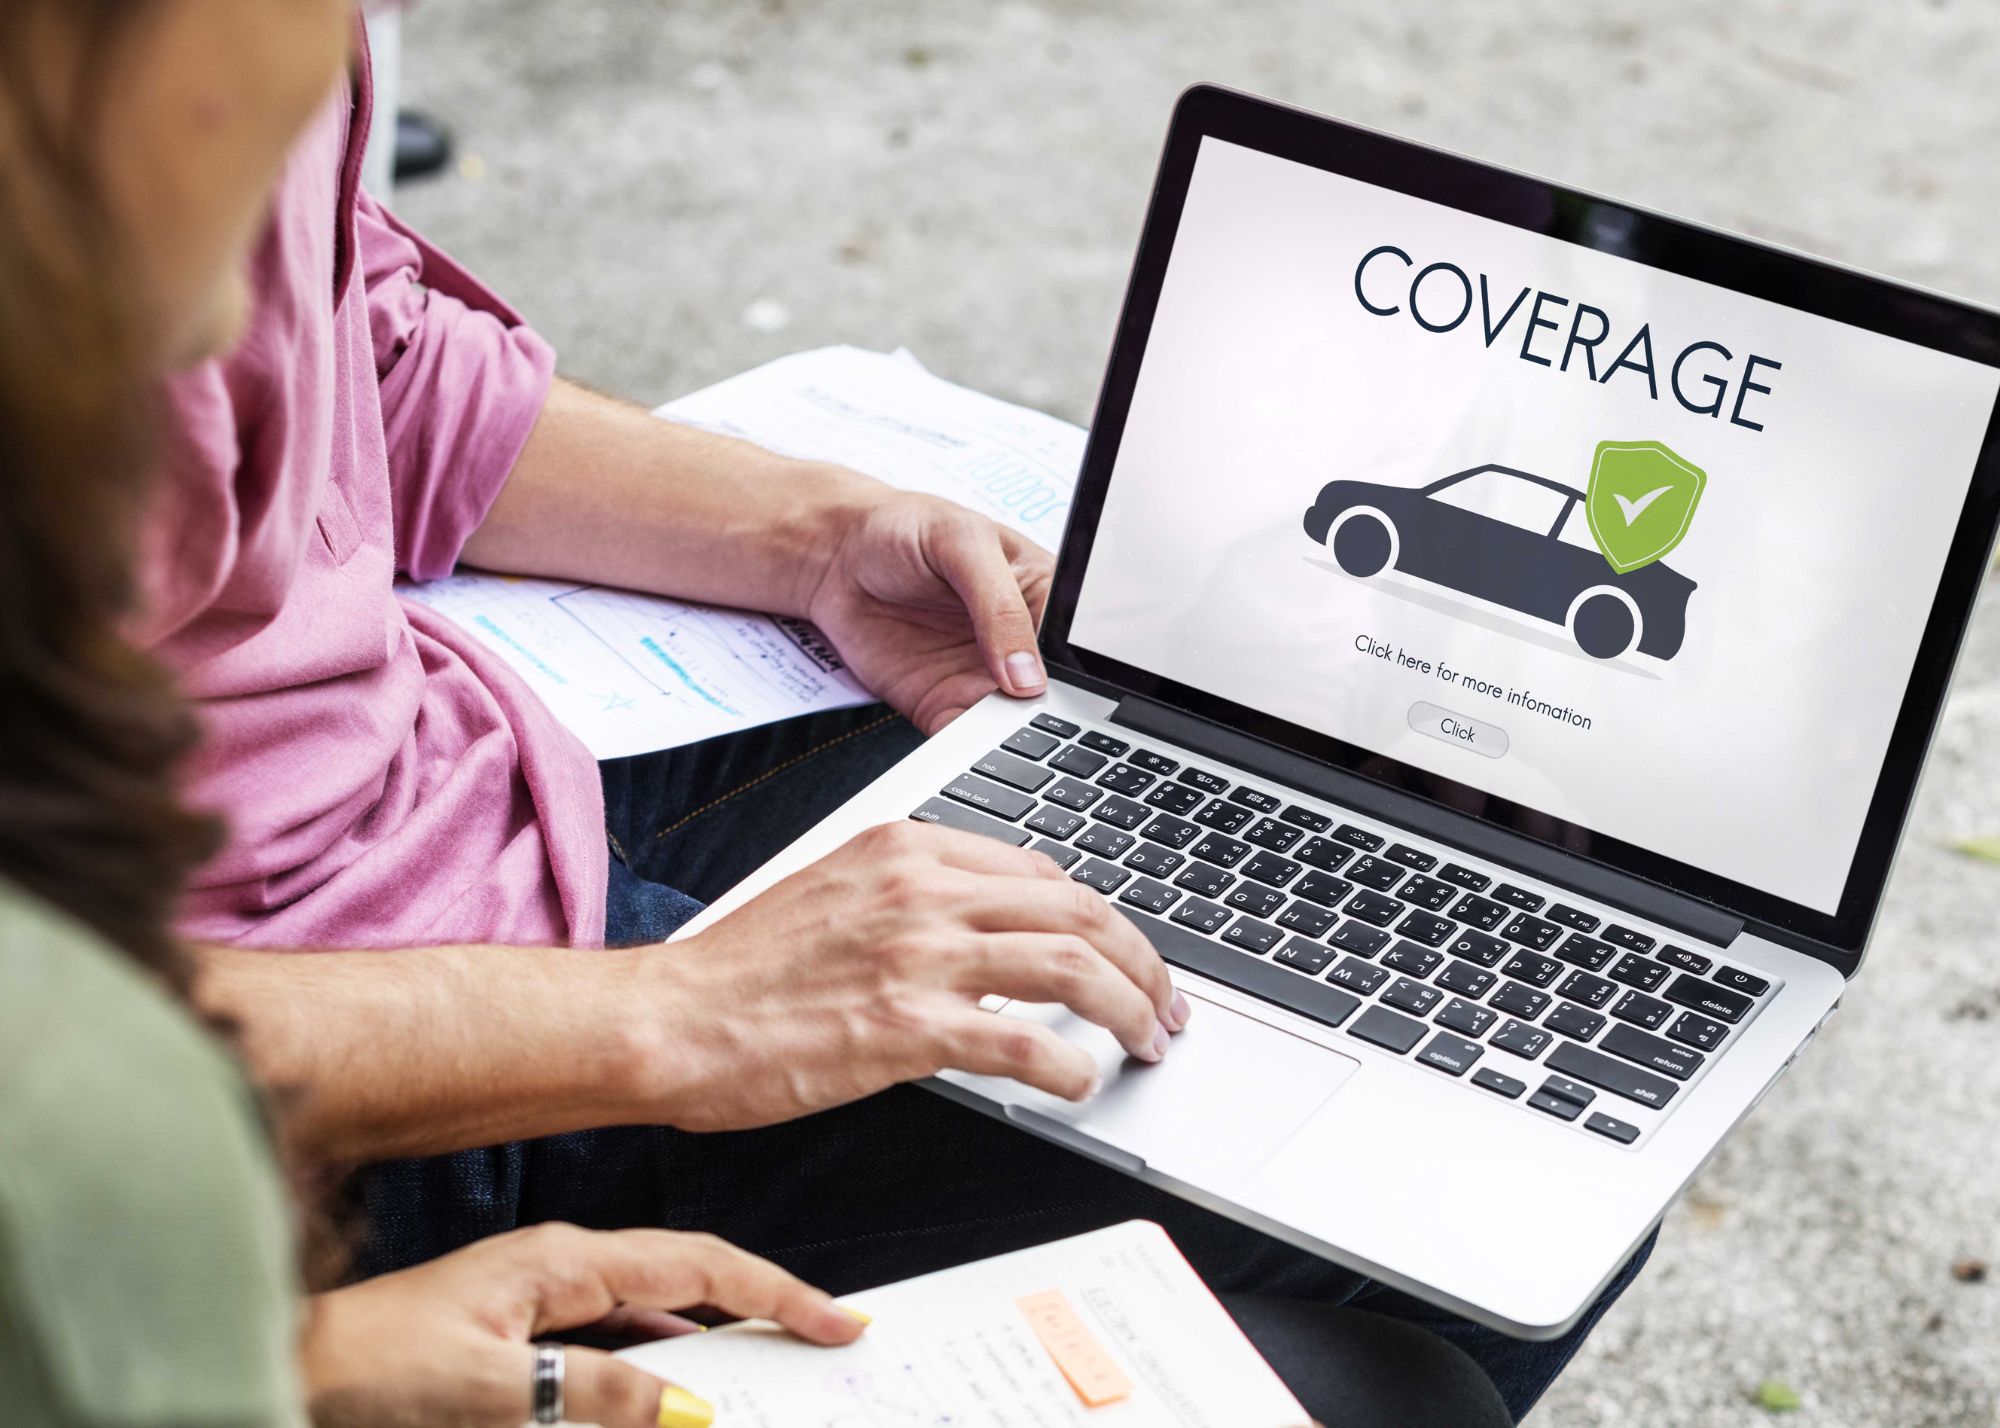 SR22 car coverage is a type of auto insurance required for high-risk drivers to maintain their driving privileges. It is commonly used in Portland, ME to fulfill legal requirements.